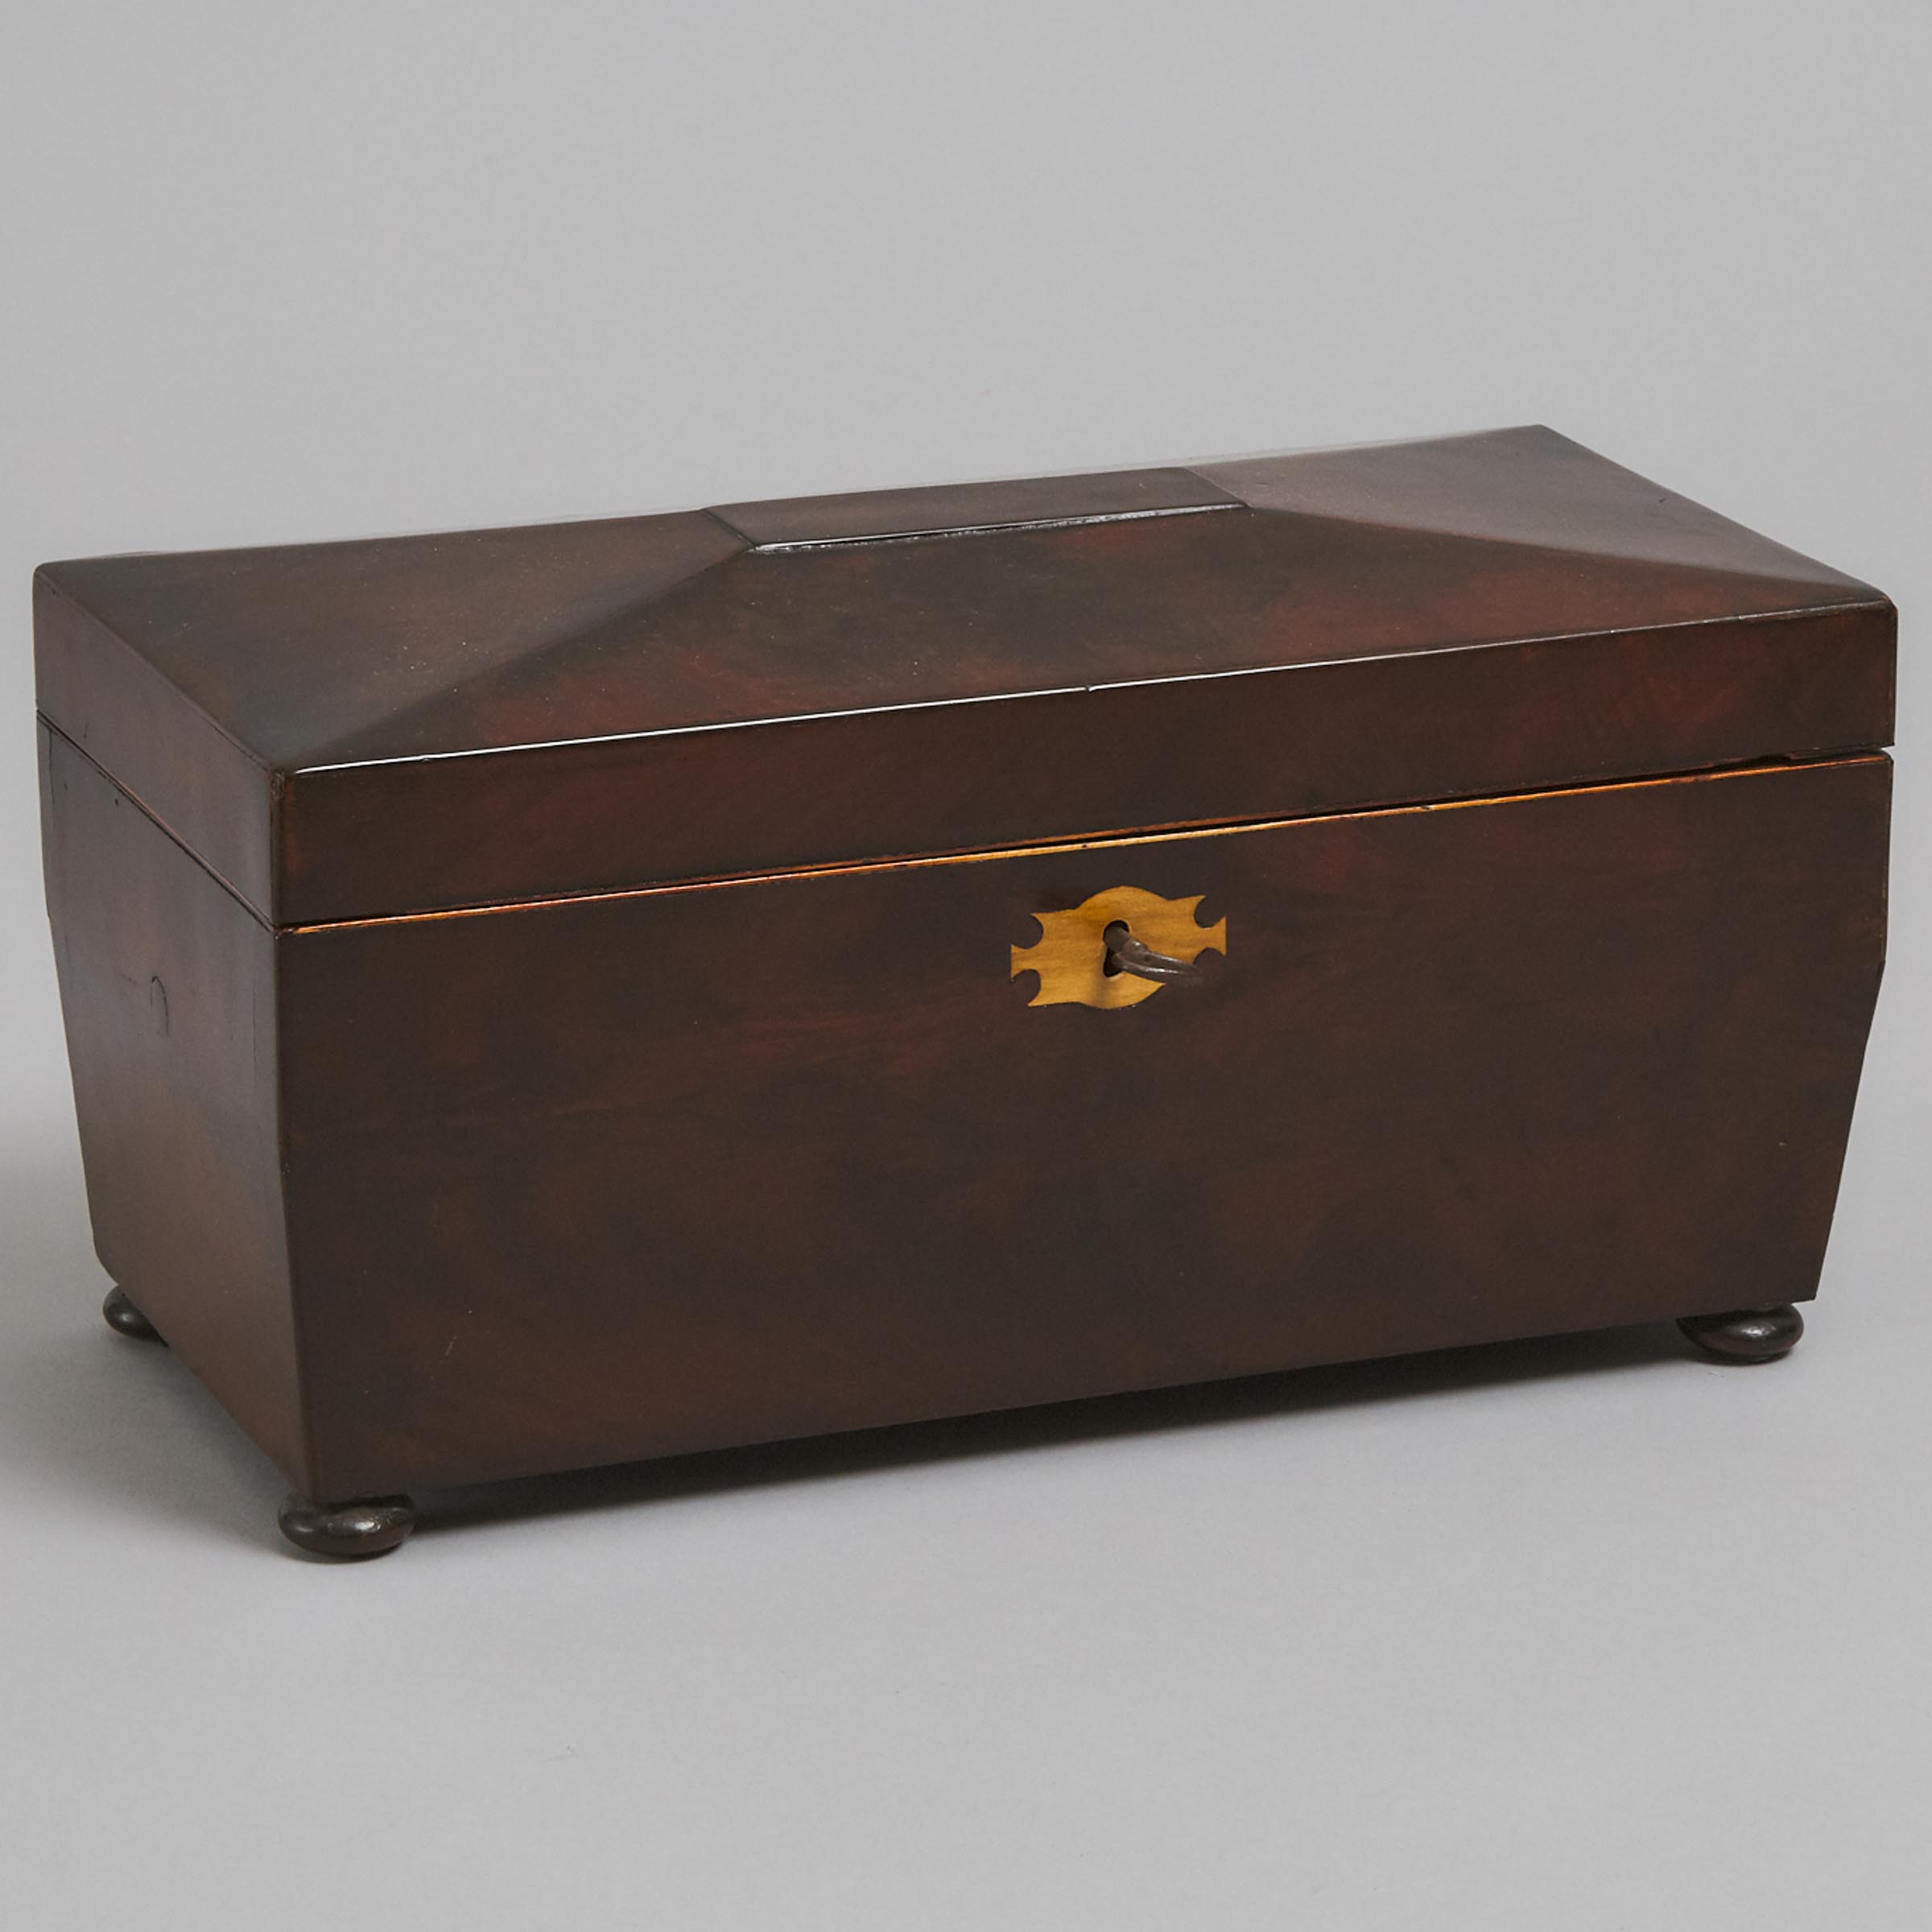 Early Victorian Rosewood Tea Caddy, 19th century